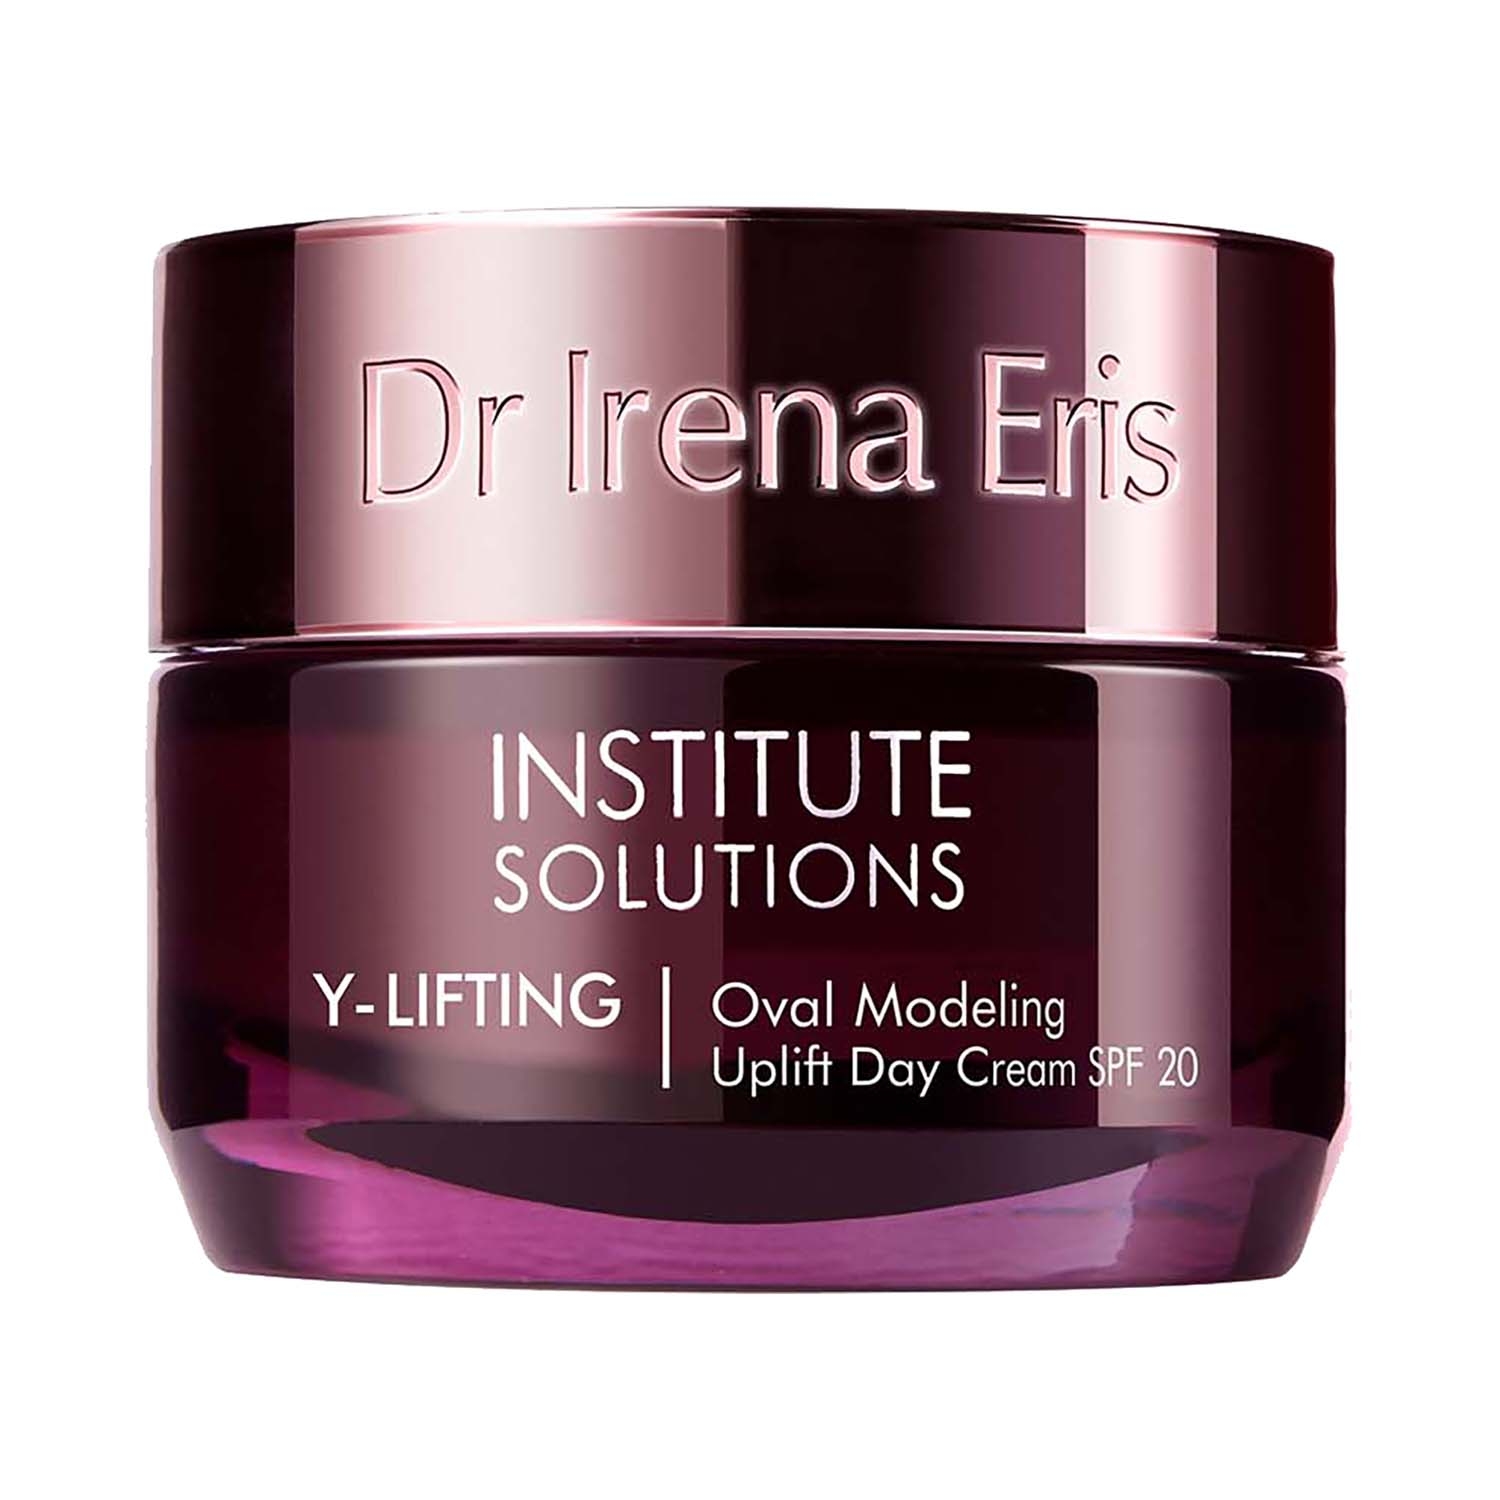 Dr Irena Eris | Dr Irena Eris Institute Solutions Y-Lifting Oval Modeling Uplift Day Cream SPF 20 (50ml)